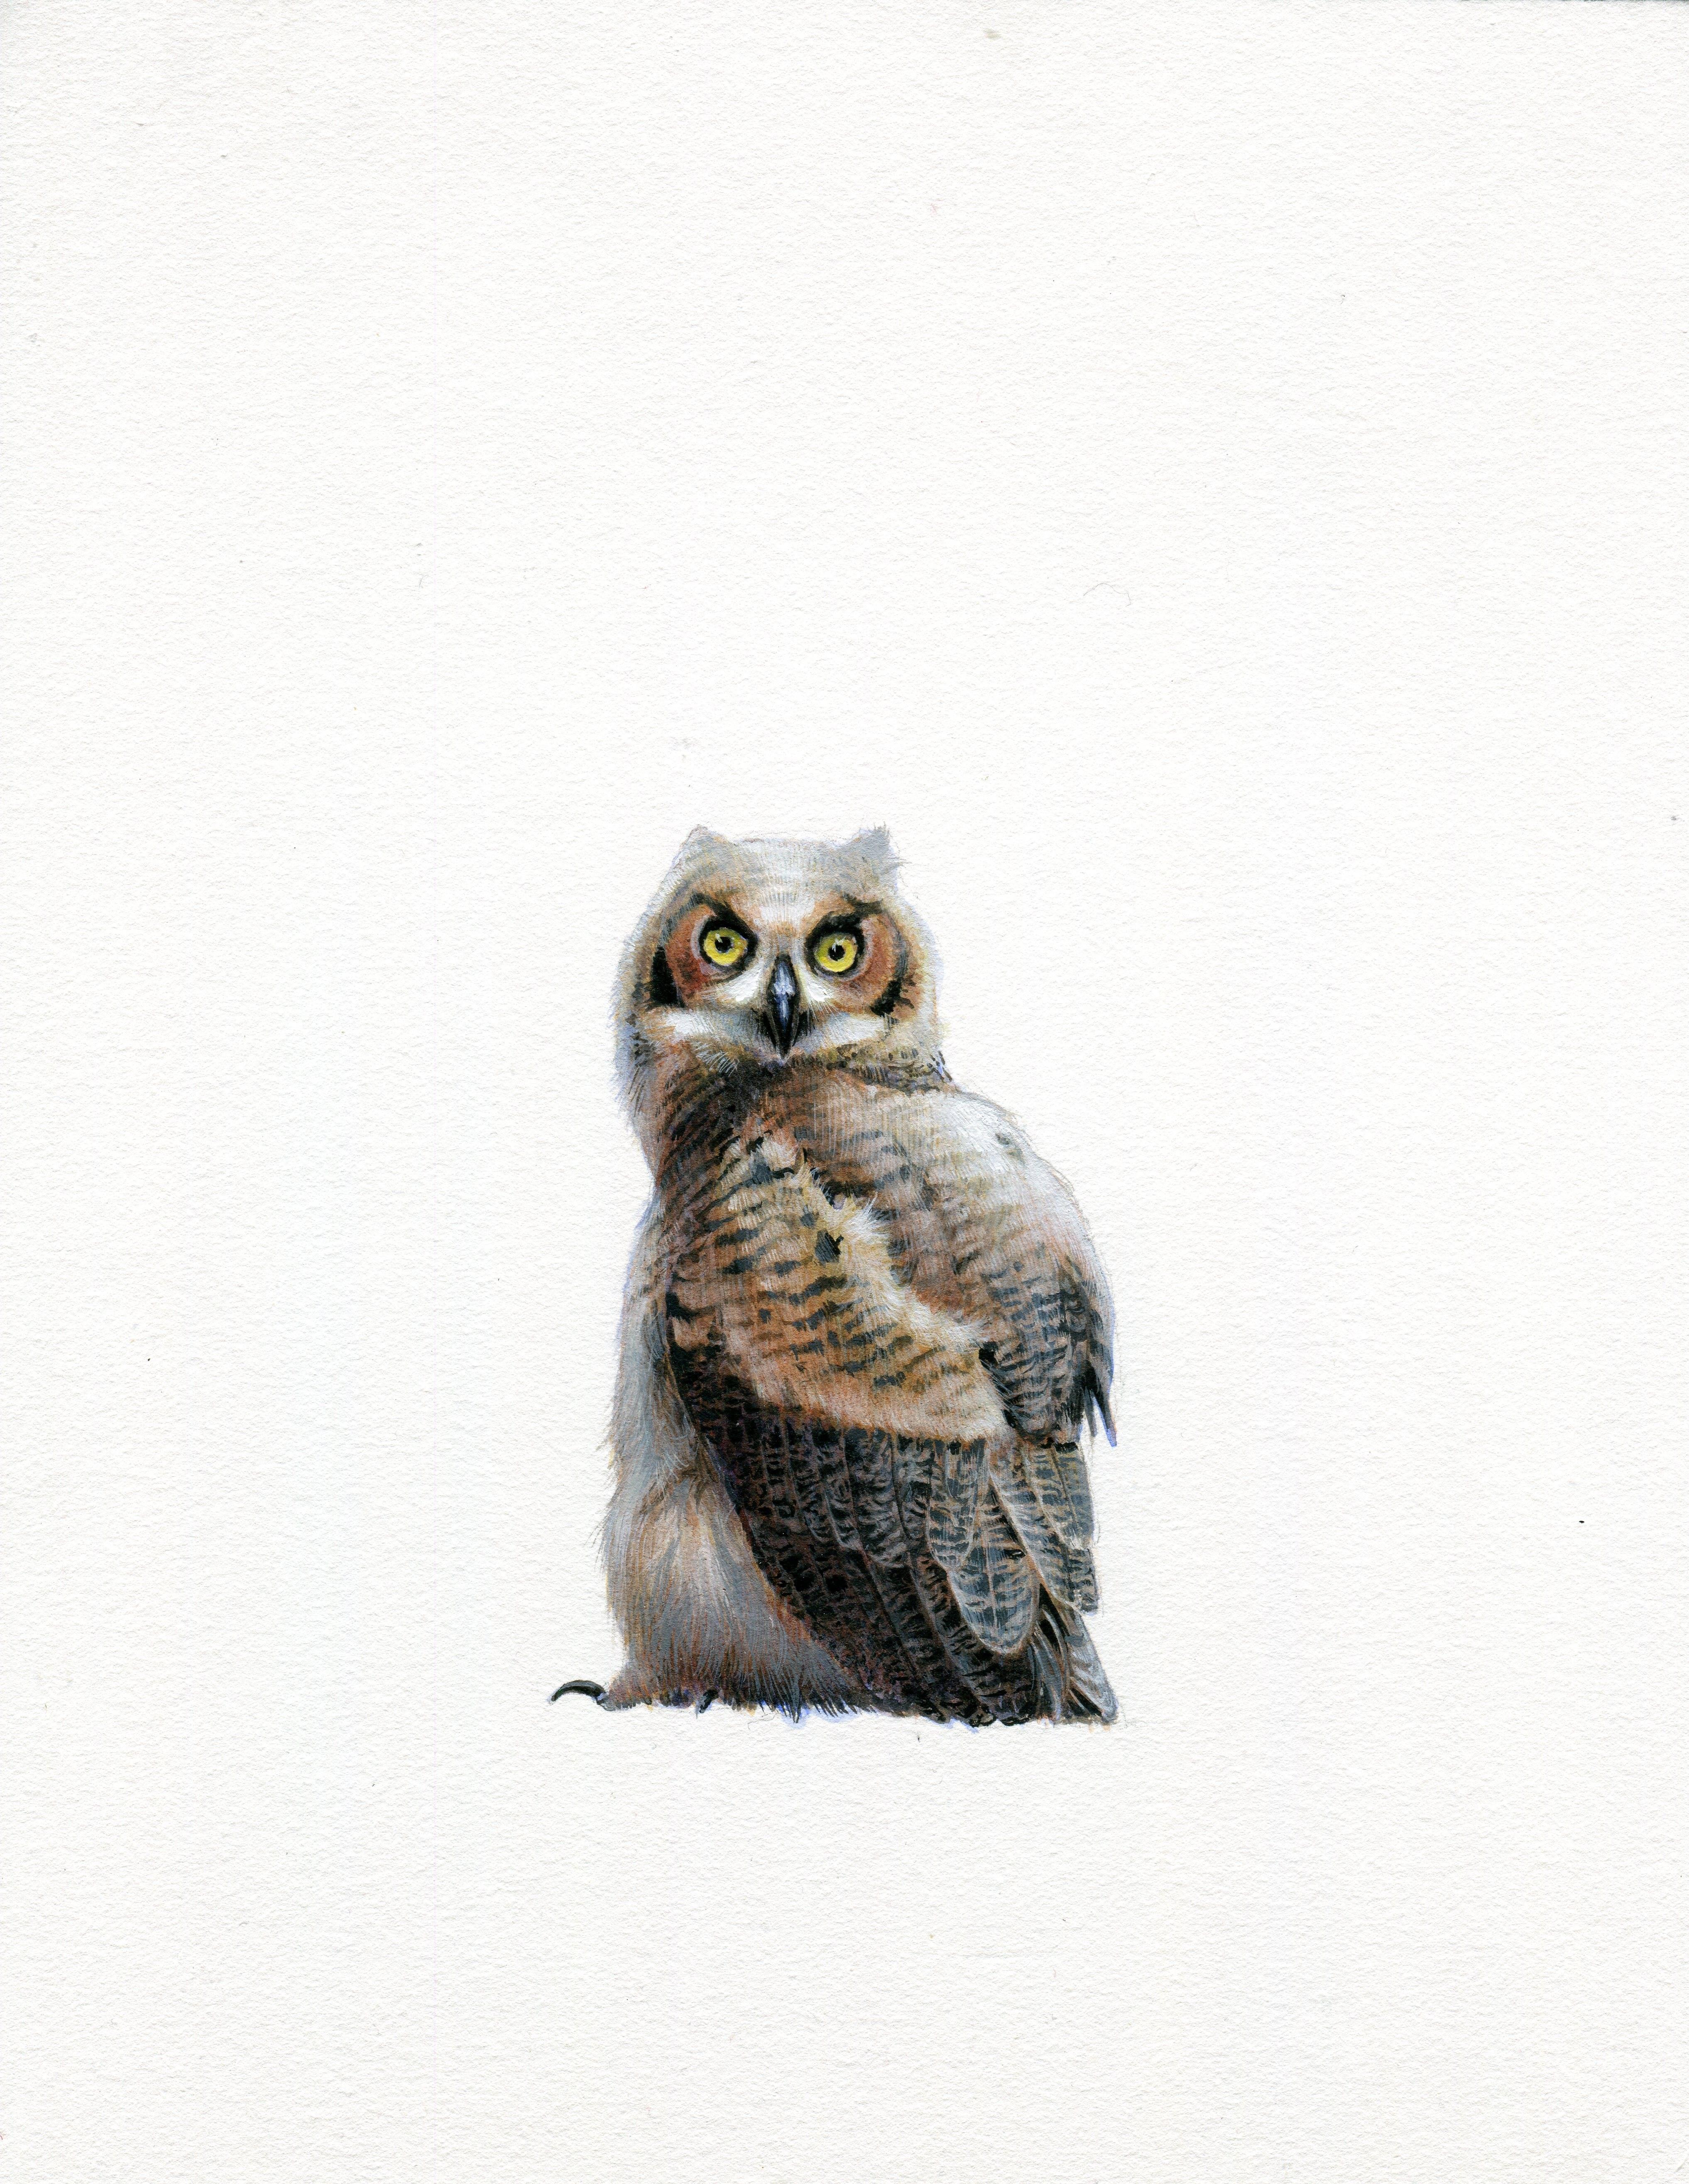 Dina Brodsky's realist gouache on paper miniature, "Beacon Dawn," 2018, depicts a large owl, looking sharply over its shoulder and directly out at the viewer. Brodsky's impeccable handling of the gouache is showcased in the highly varied and